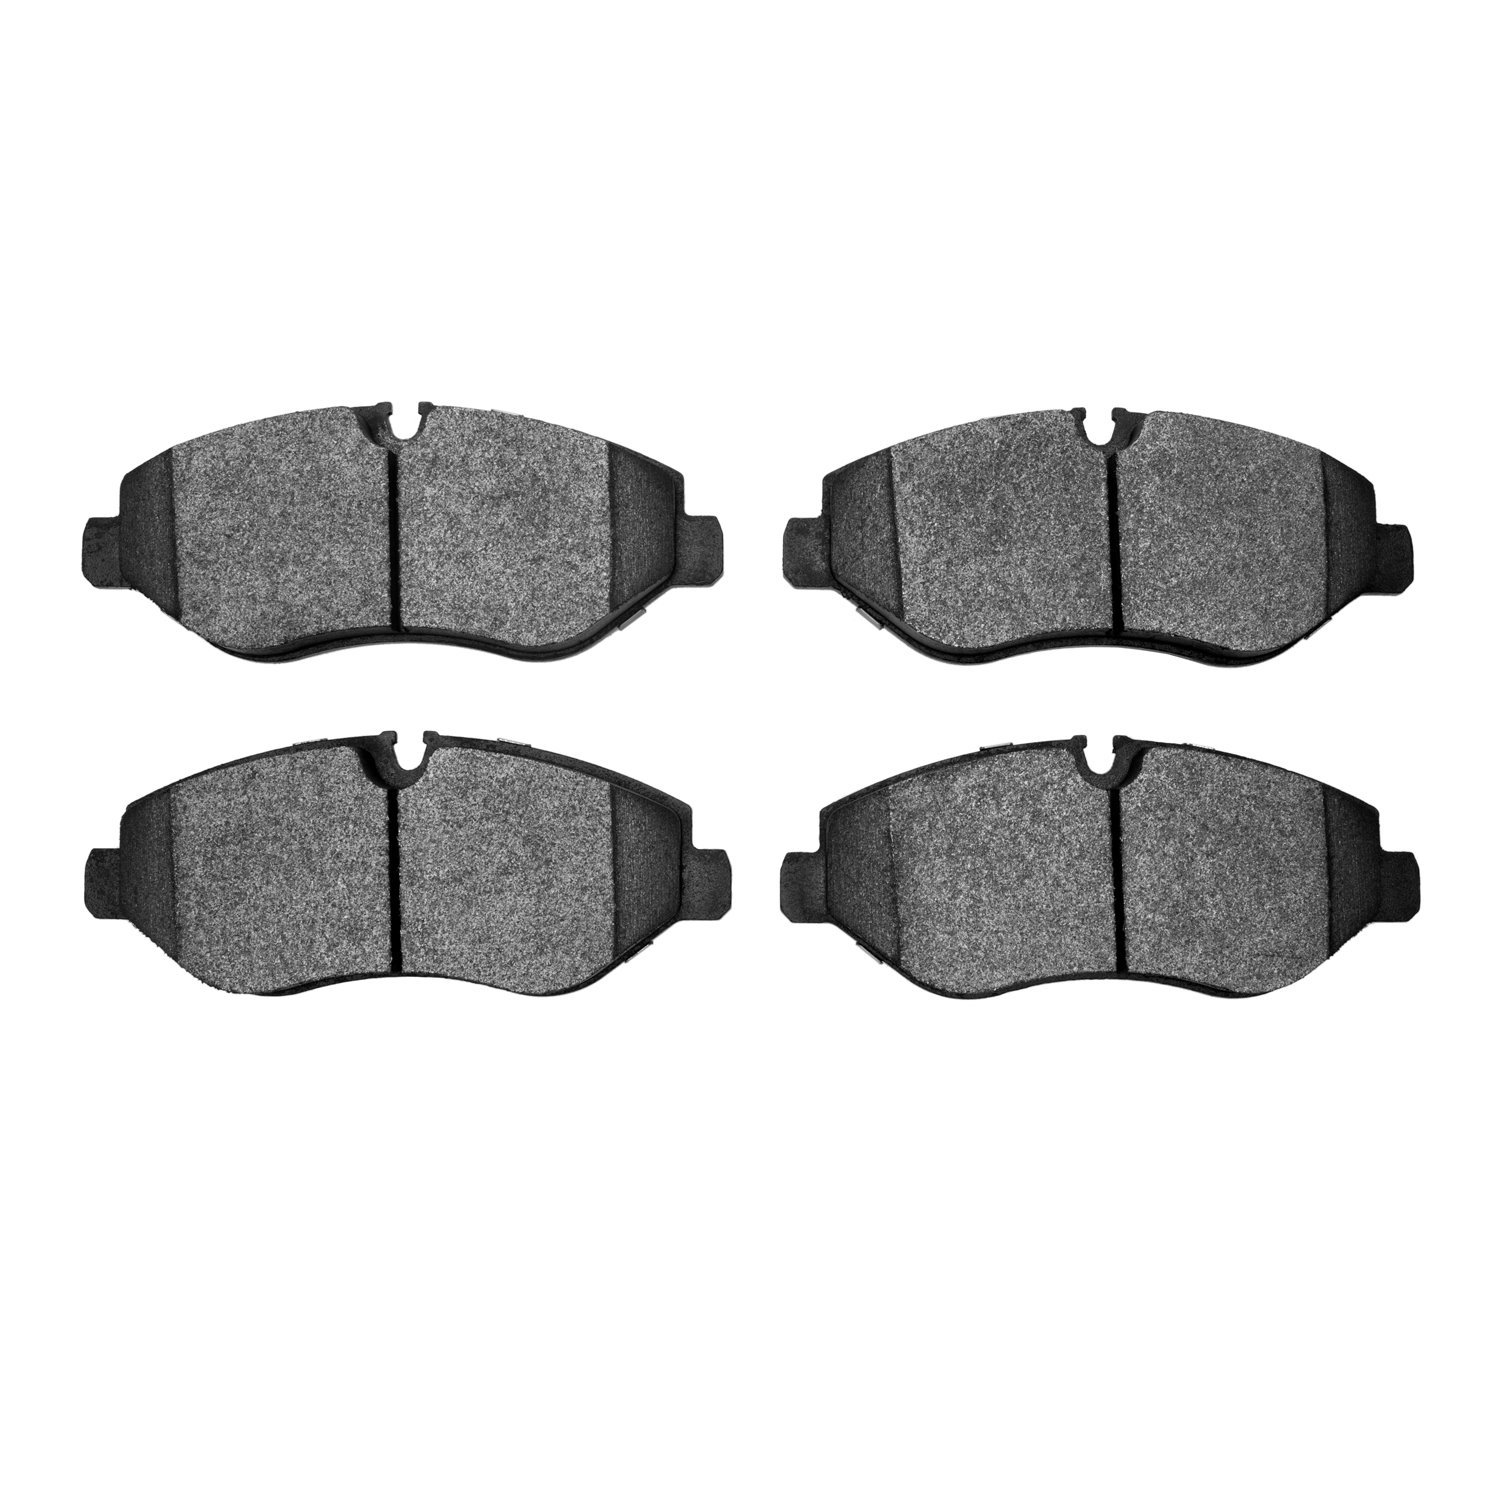 1311-1316-00 3000-Series Semi-Metallic Brake Pads, Fits Select Multiple Makes/Models, Position: Fr,Front